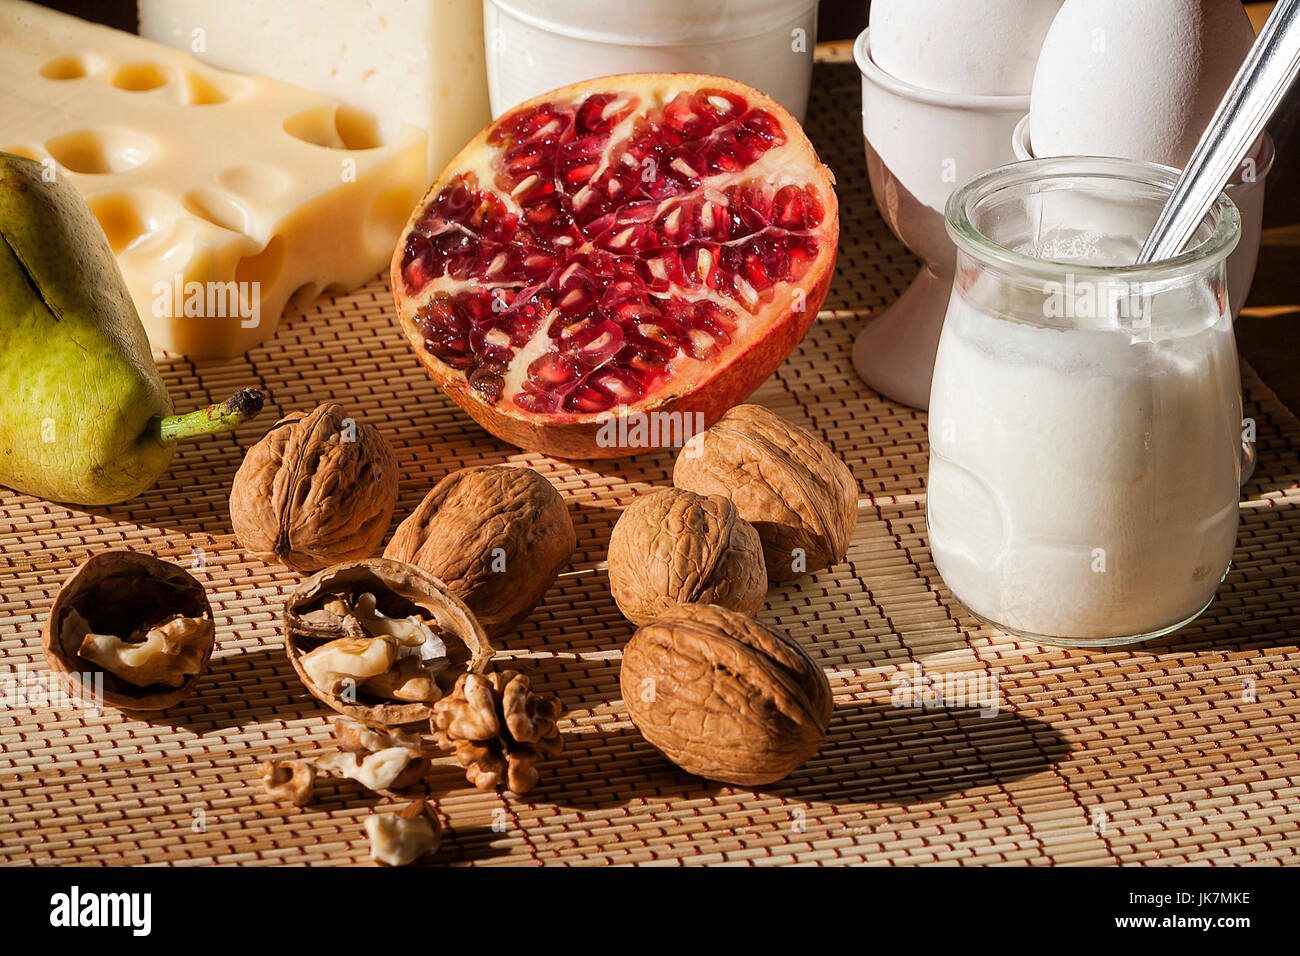 Breakfast with mediterranean food, fruits and dairy products Stock Photo